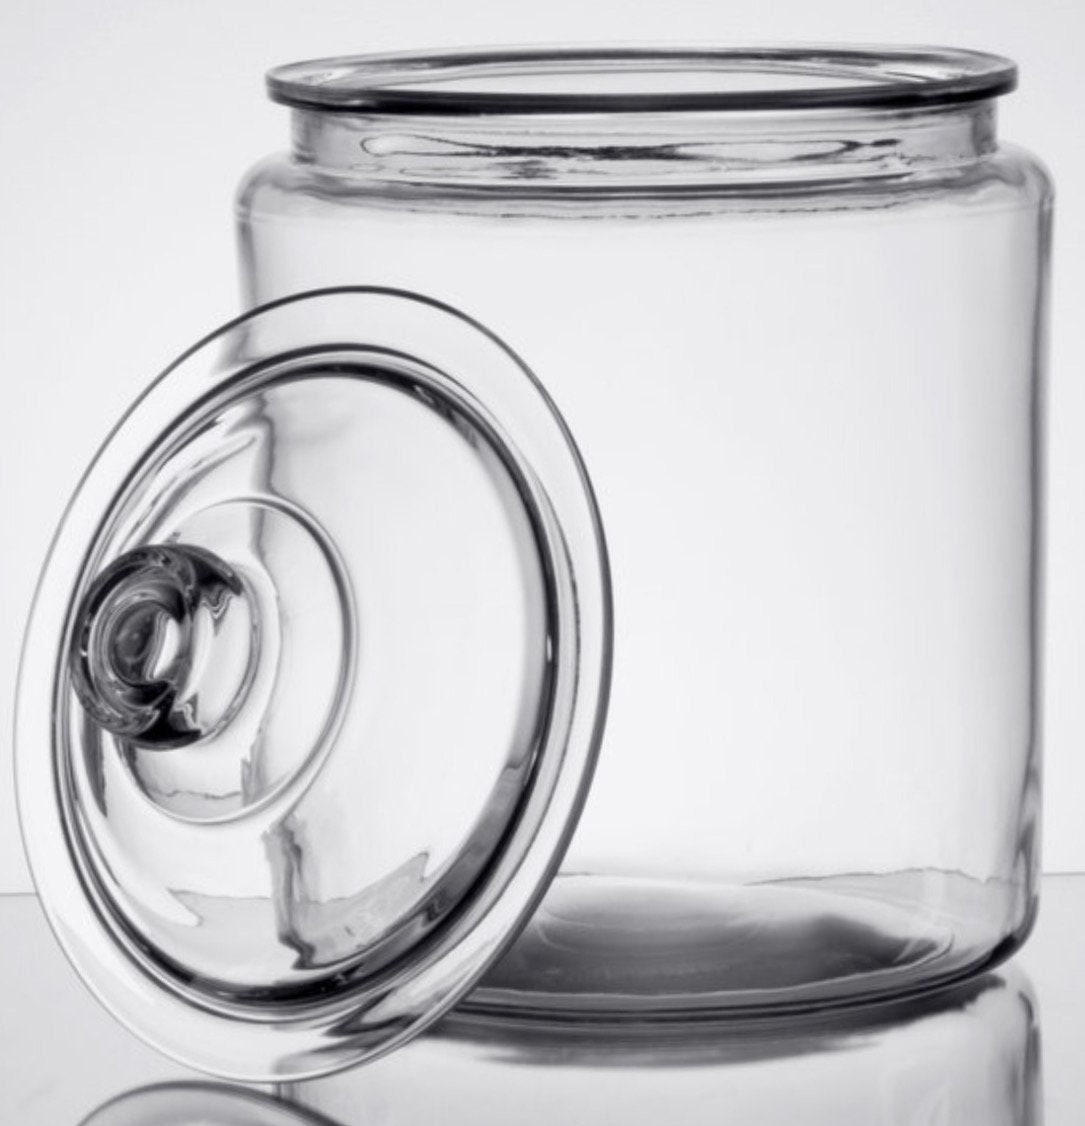 3 Pack Glass Apothecary Jar, Candy Jars With Lids, Clear Glass